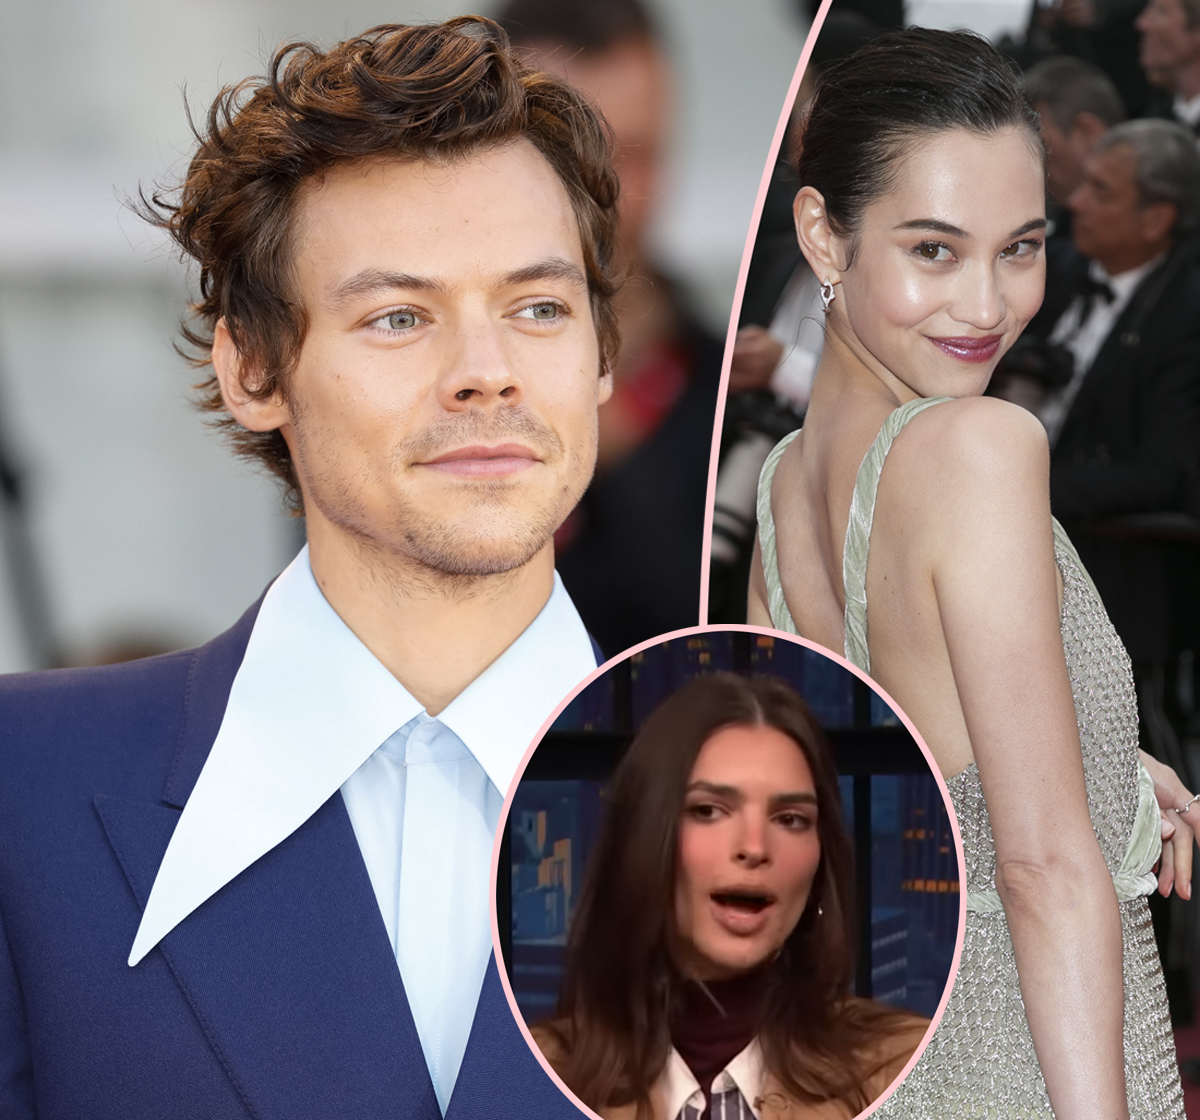 #Harry Styles Was Seen Hanging Out With Ex Kiko Mizuhara HOURS After Emily Ratajkowski Kiss!